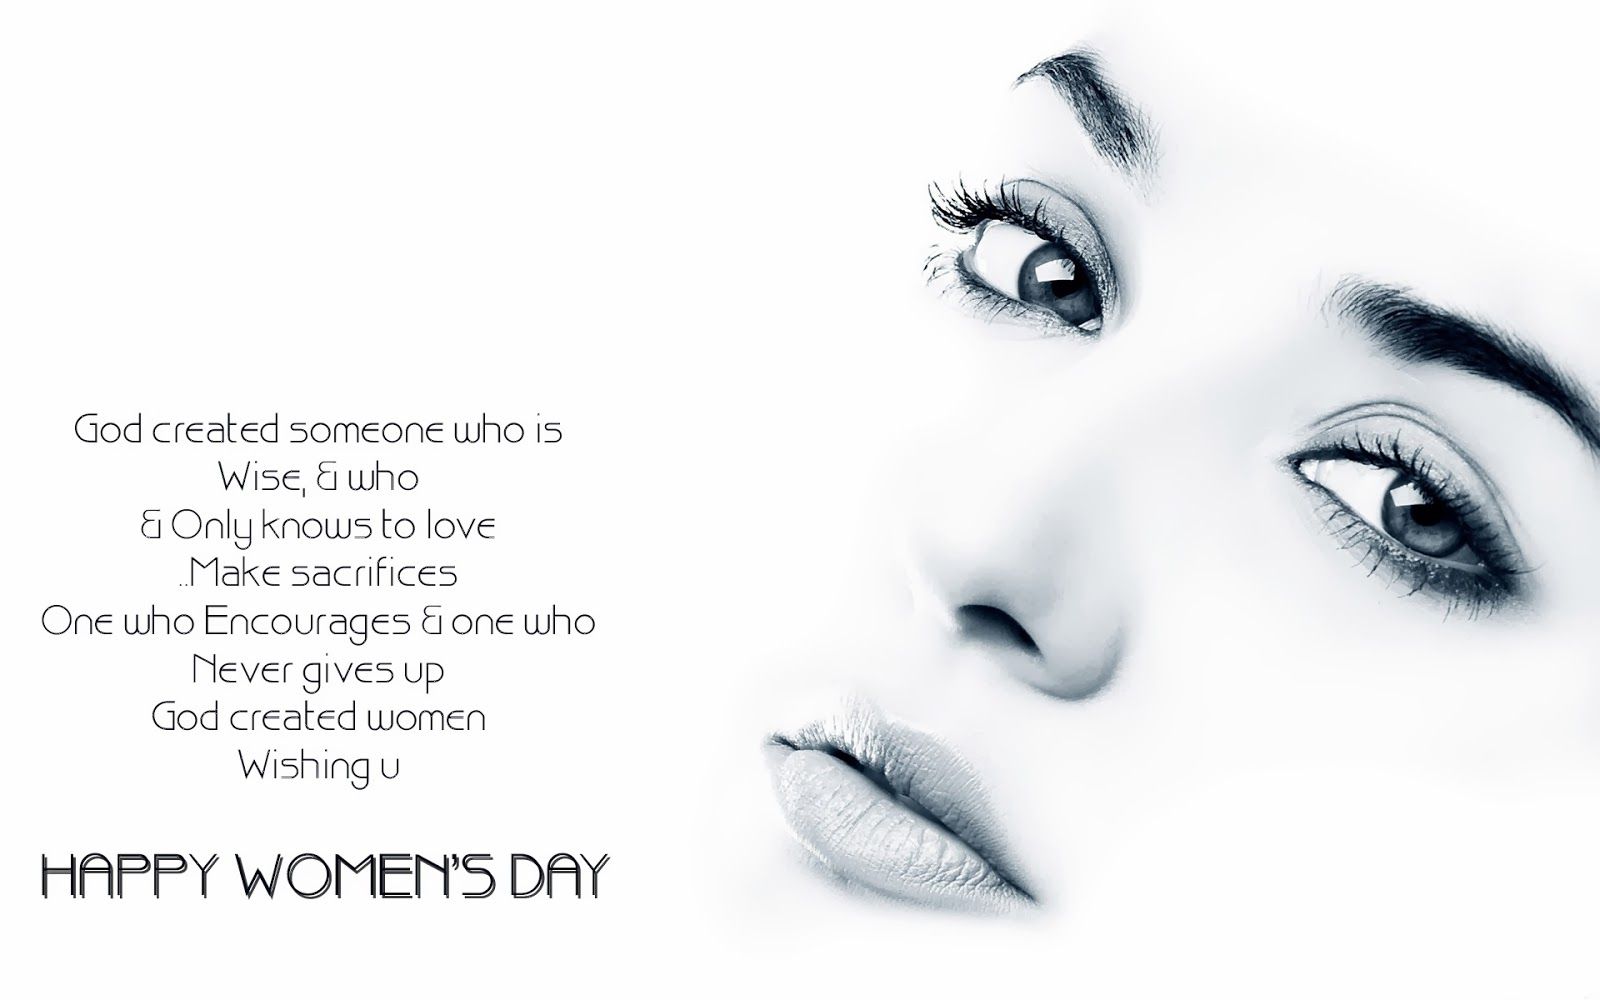 Best Women's day Fb cover image to share on Facebook